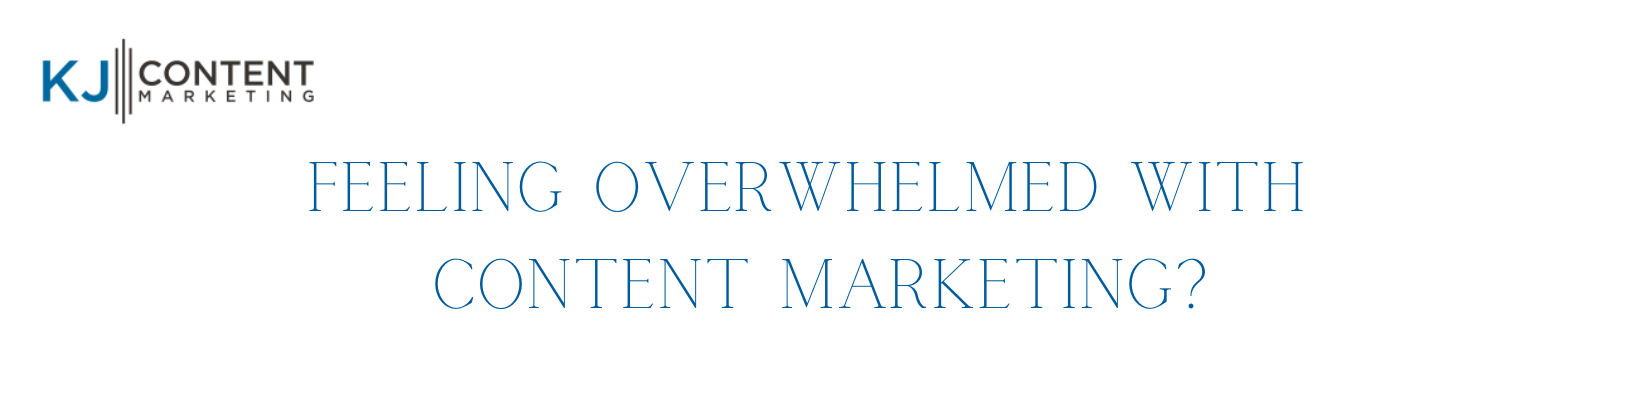 Feeling overwhelmed with content marketing (1)